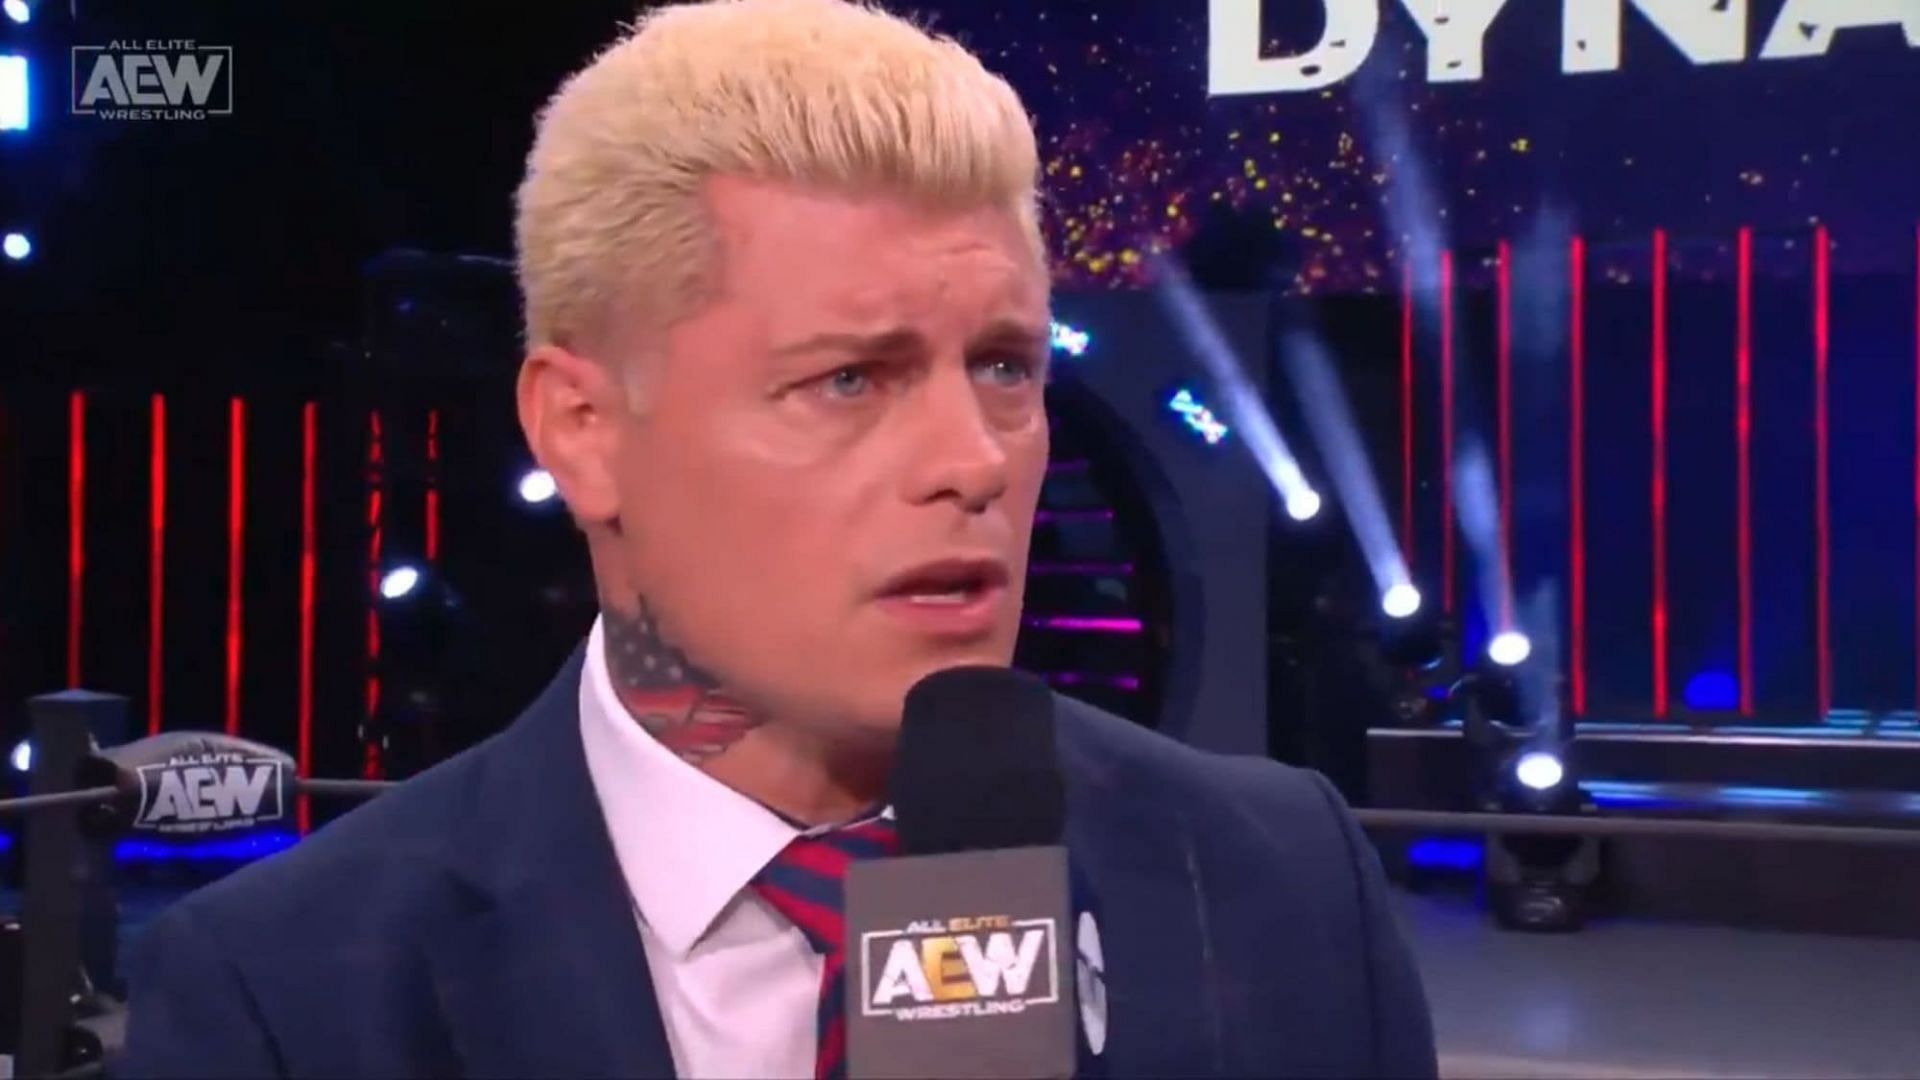 The former TNT Champion is no longer with AEW